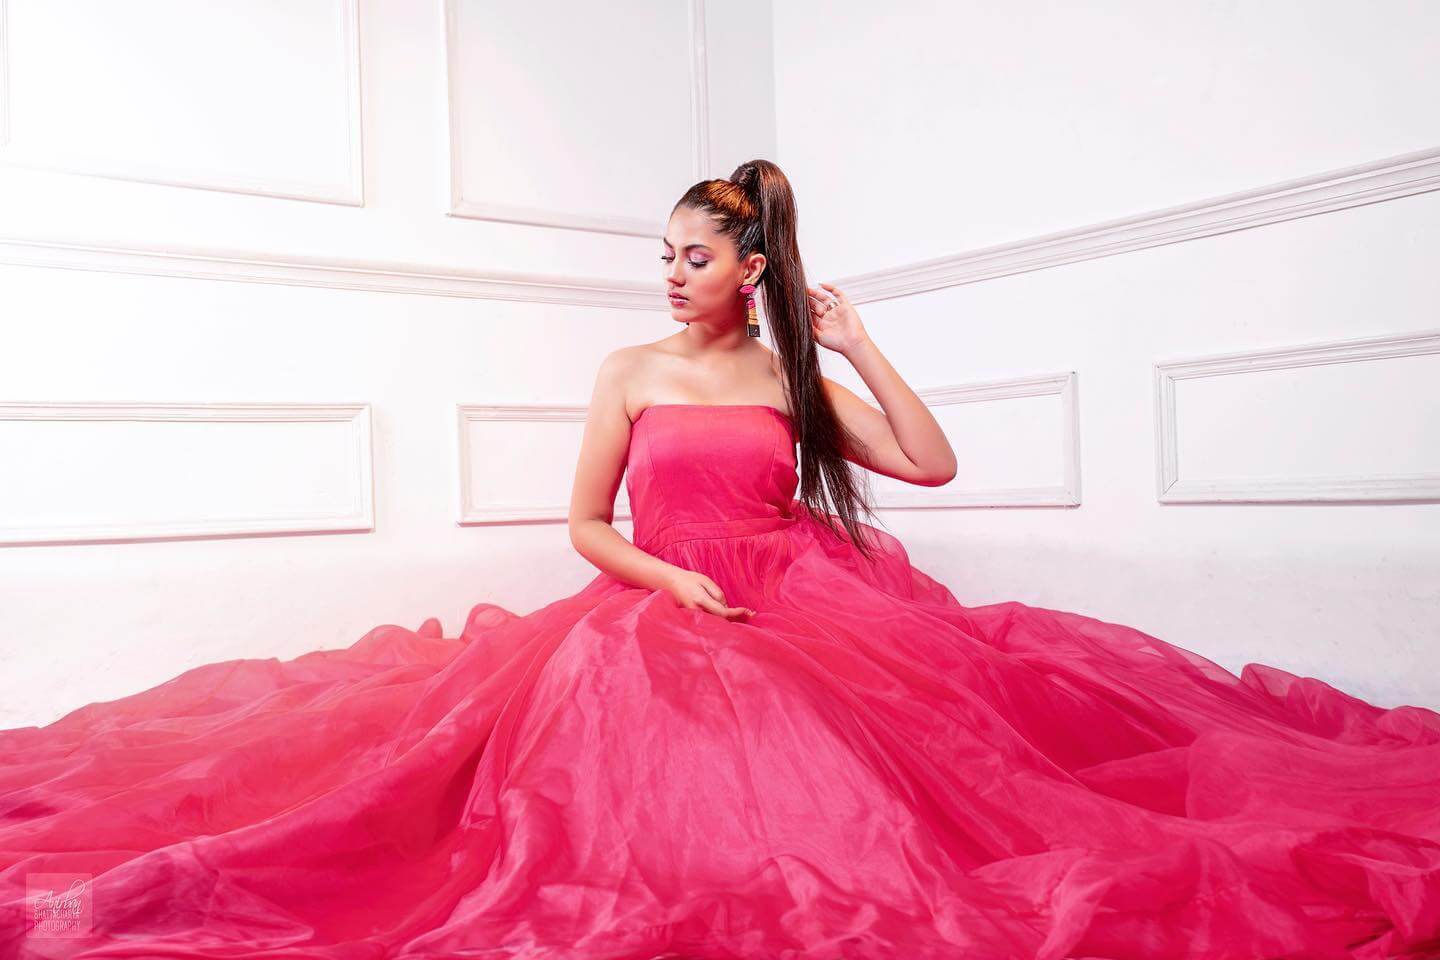 Bong Girl Rittika Sen Sexy & Sleek Look In Pink OFF Shoulder Fit & Flare Flowy Gown Feels Like Princess Outfits Dresses